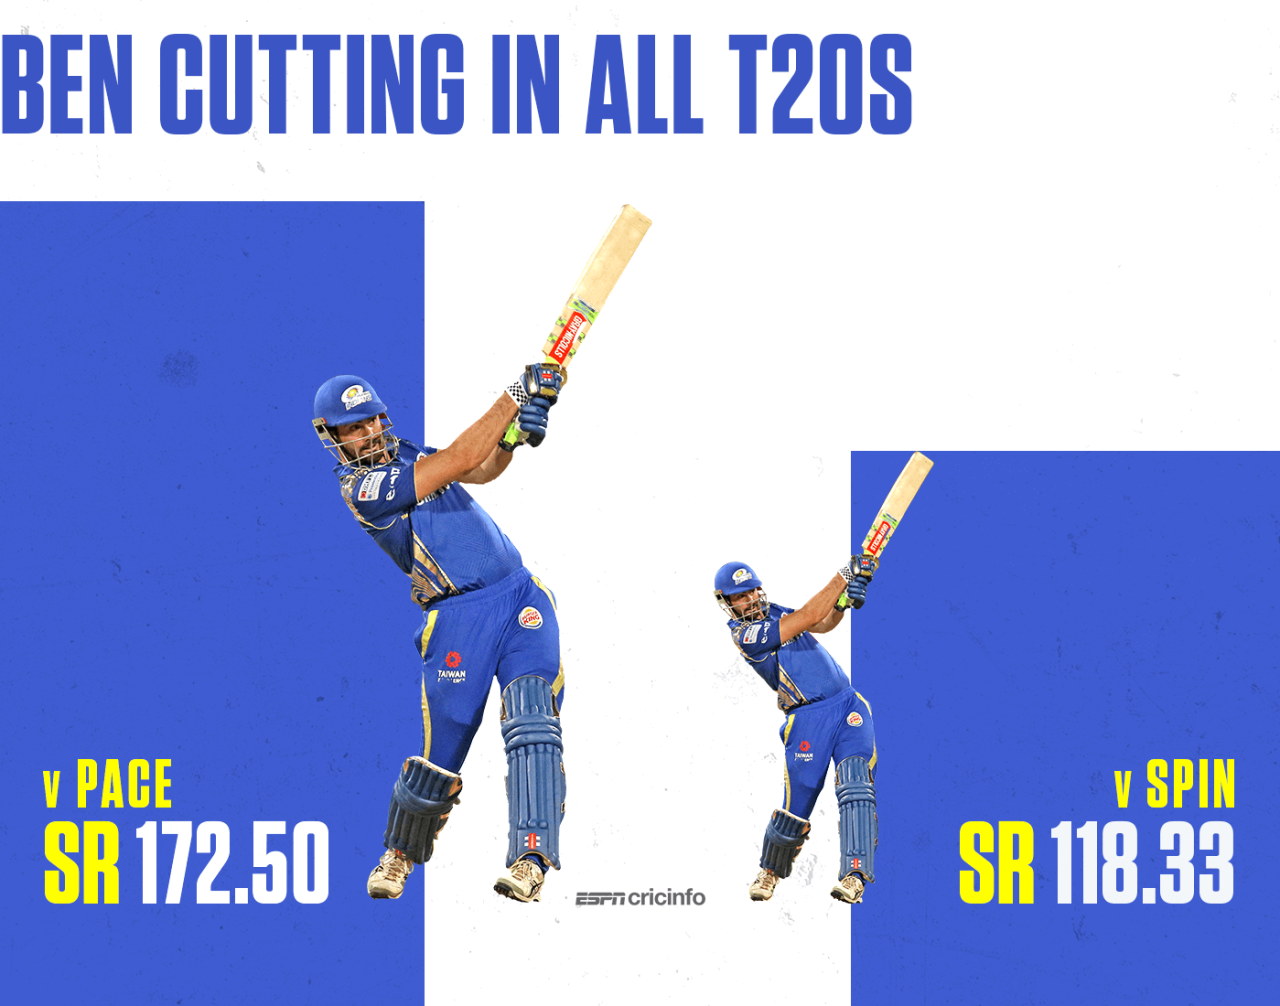 Ben Cutting has struggled to hit spinners in his T20 career